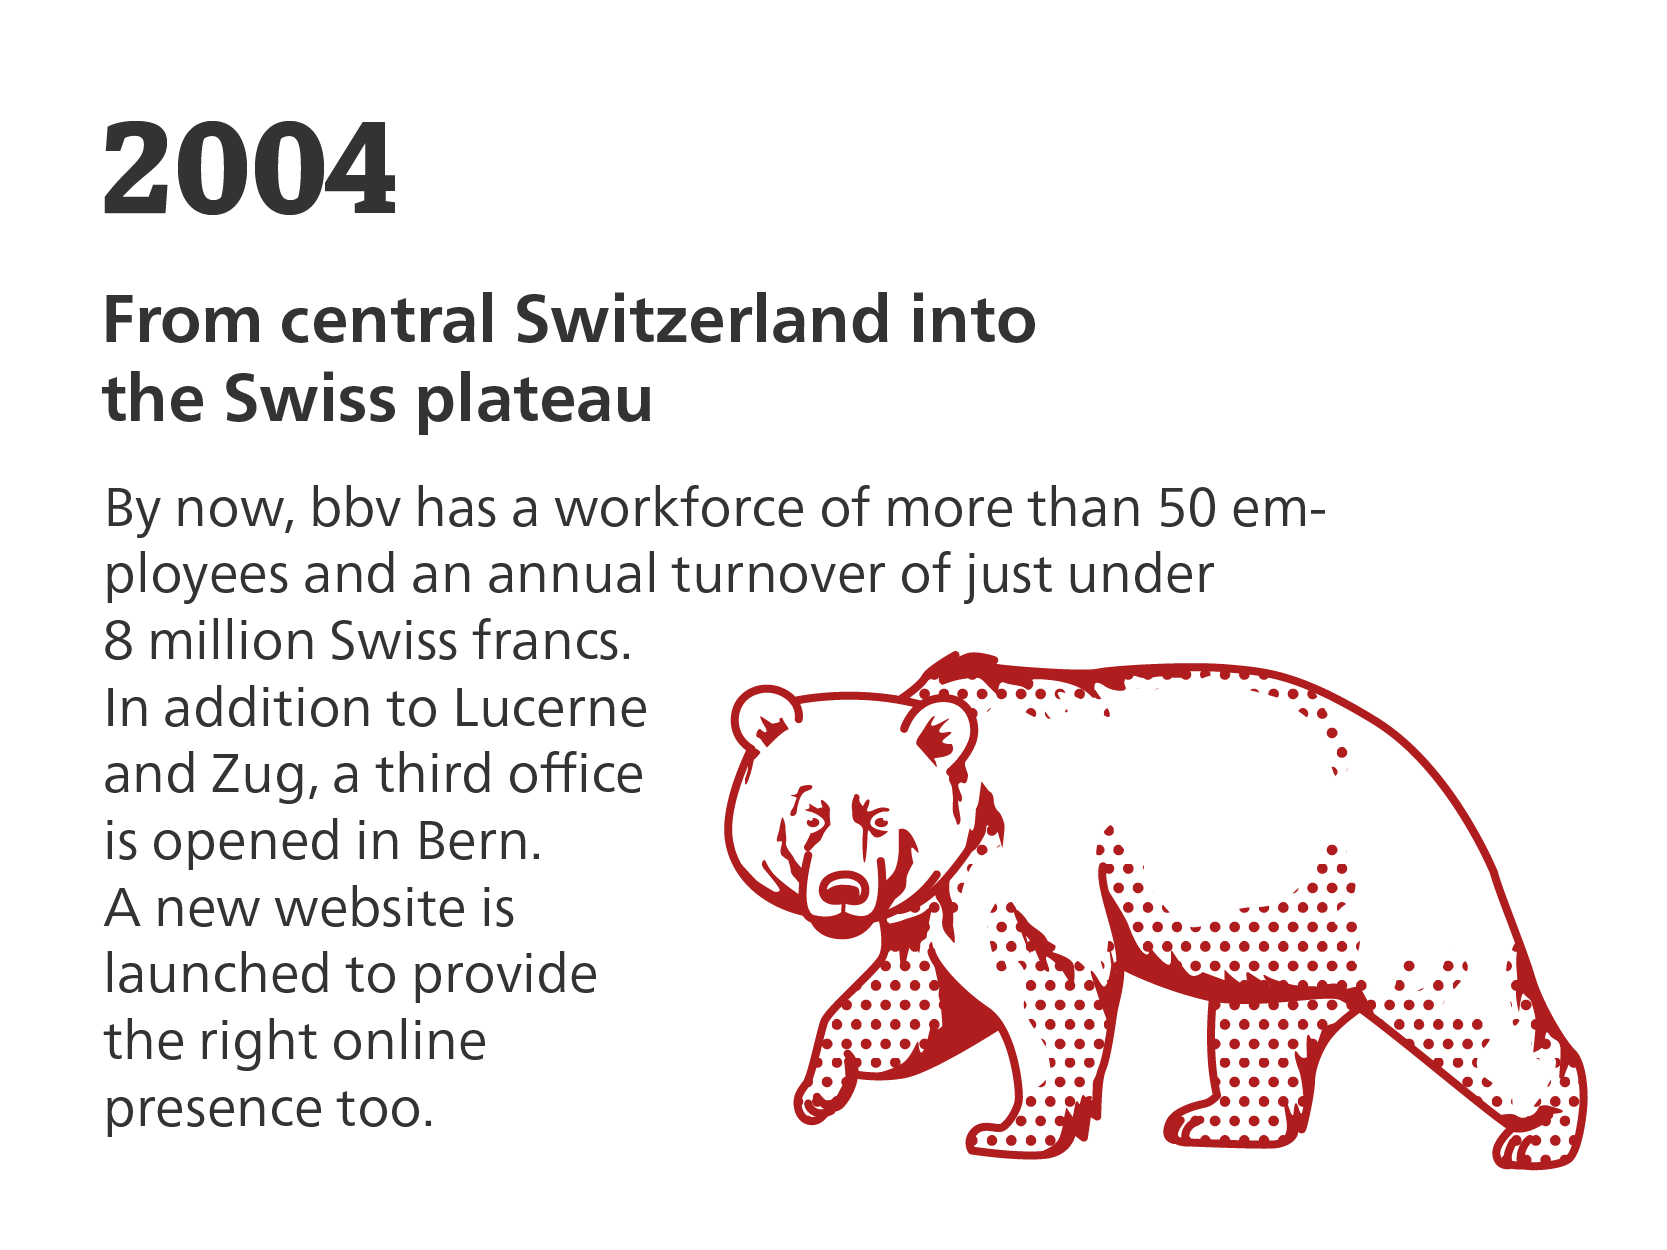 bbv history from central suisse to the plateau